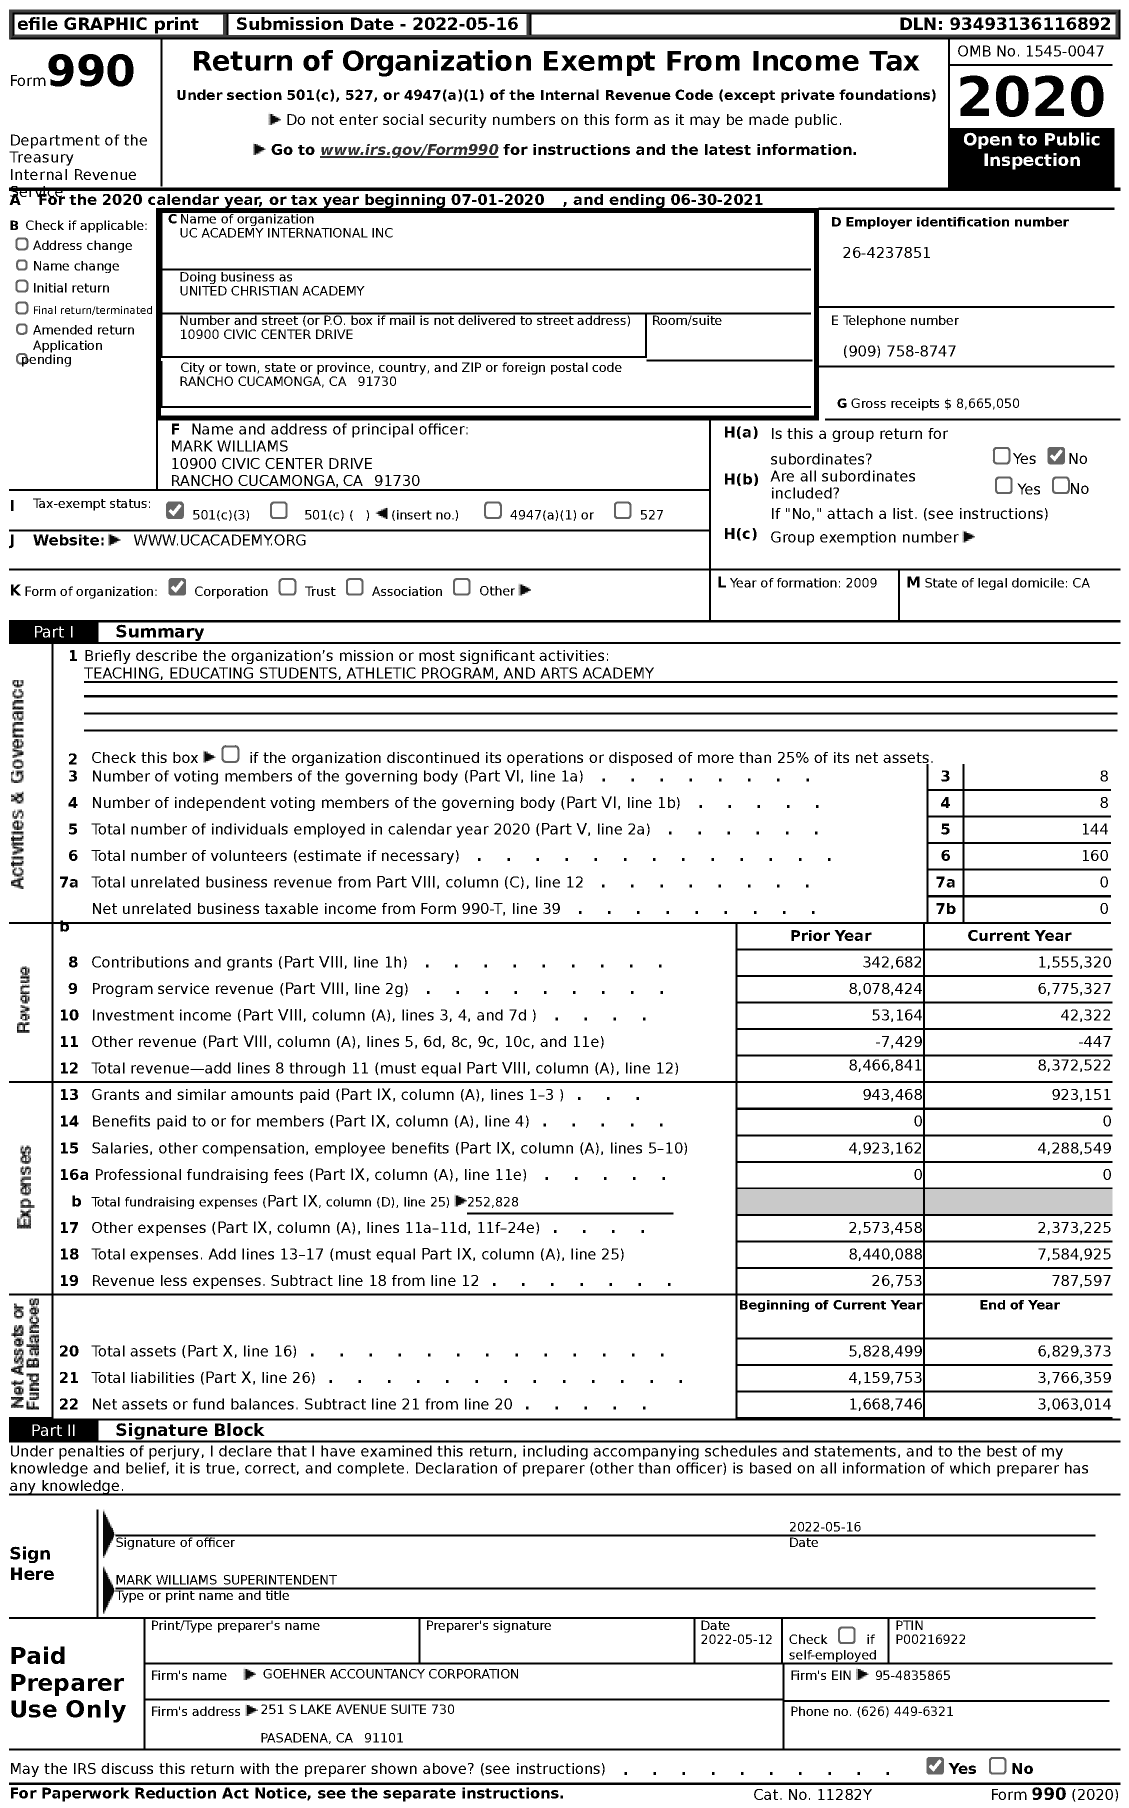 Image of first page of 2020 Form 990 for United Christian Academy / Uc Academy International Inc